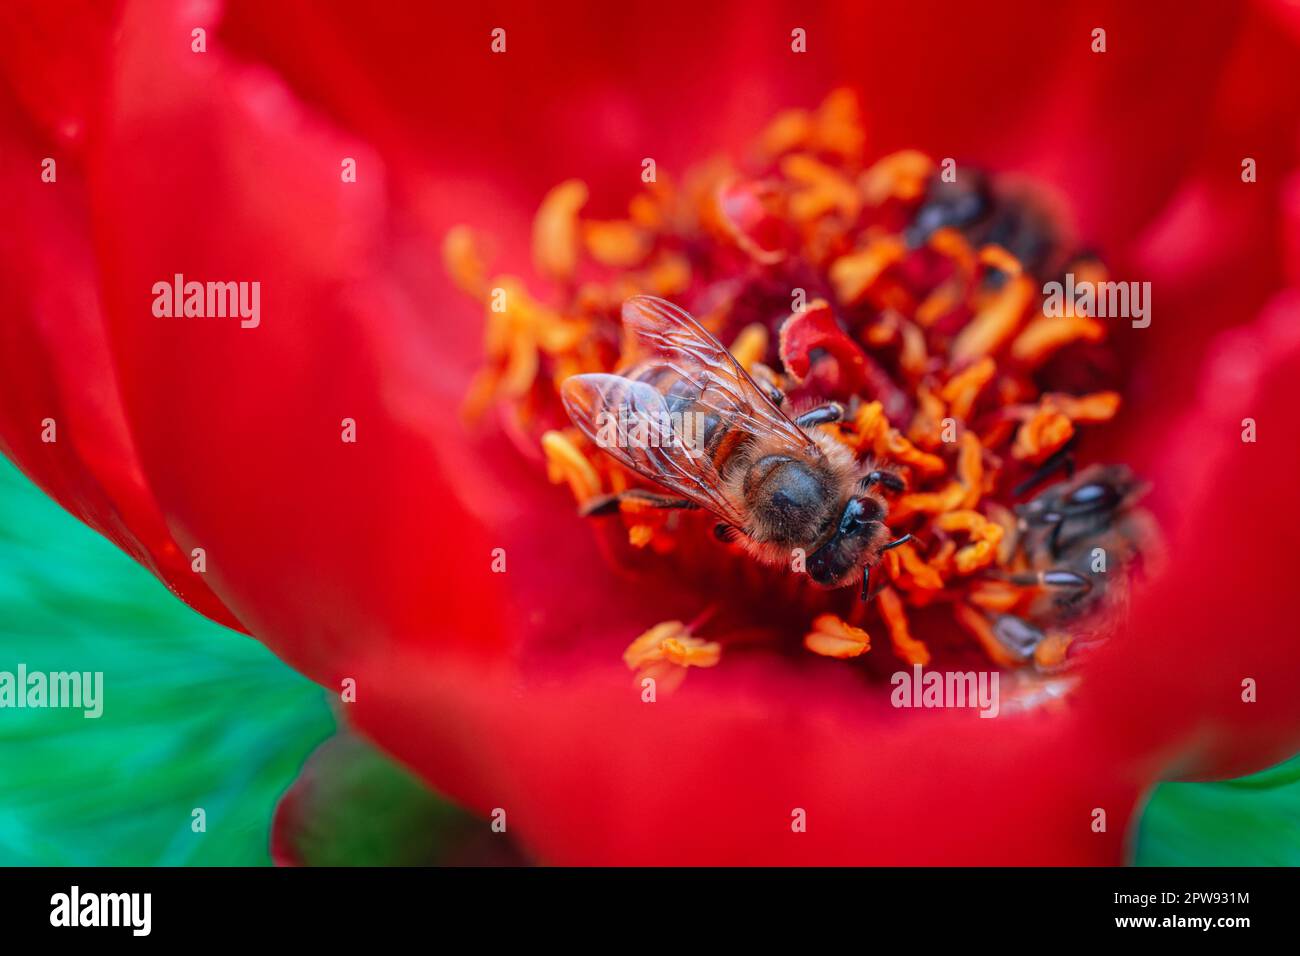 Bees gathering pollen on red peony flower Stock Photo